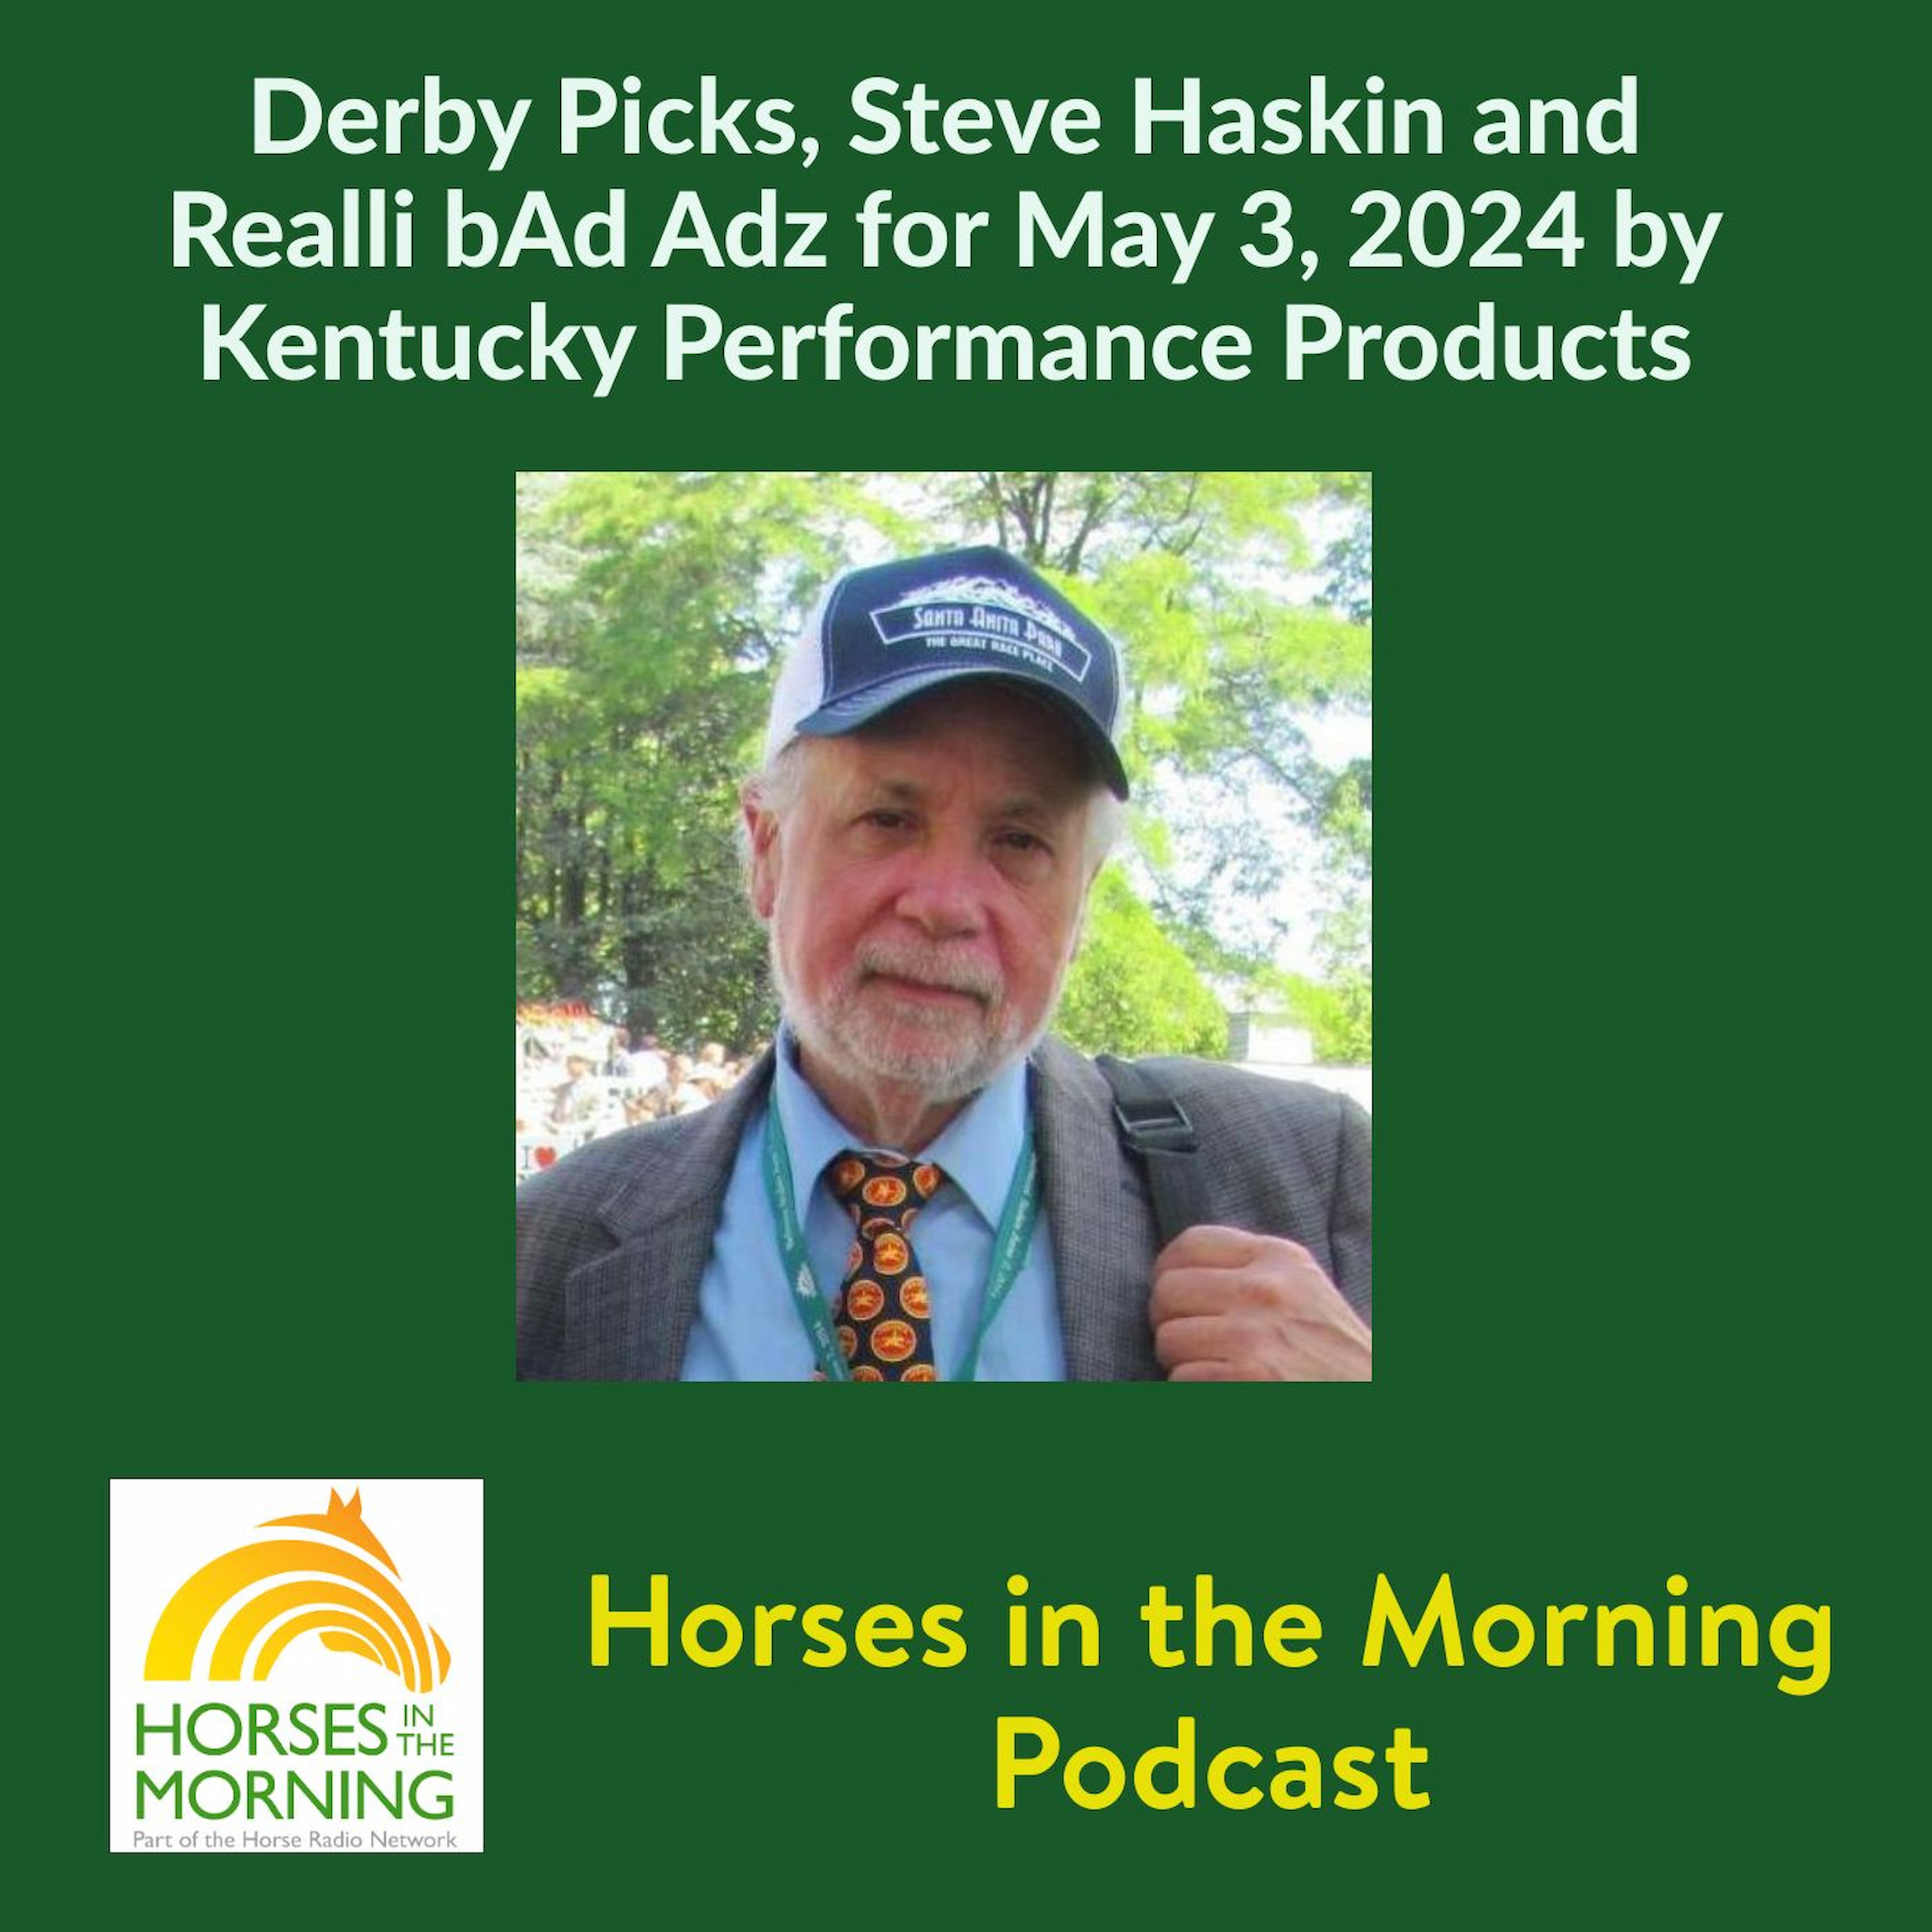 Derby Picks, Steve Haskin and Realli bAd Adz for May 3, 2024 by Kentucky Performance Products